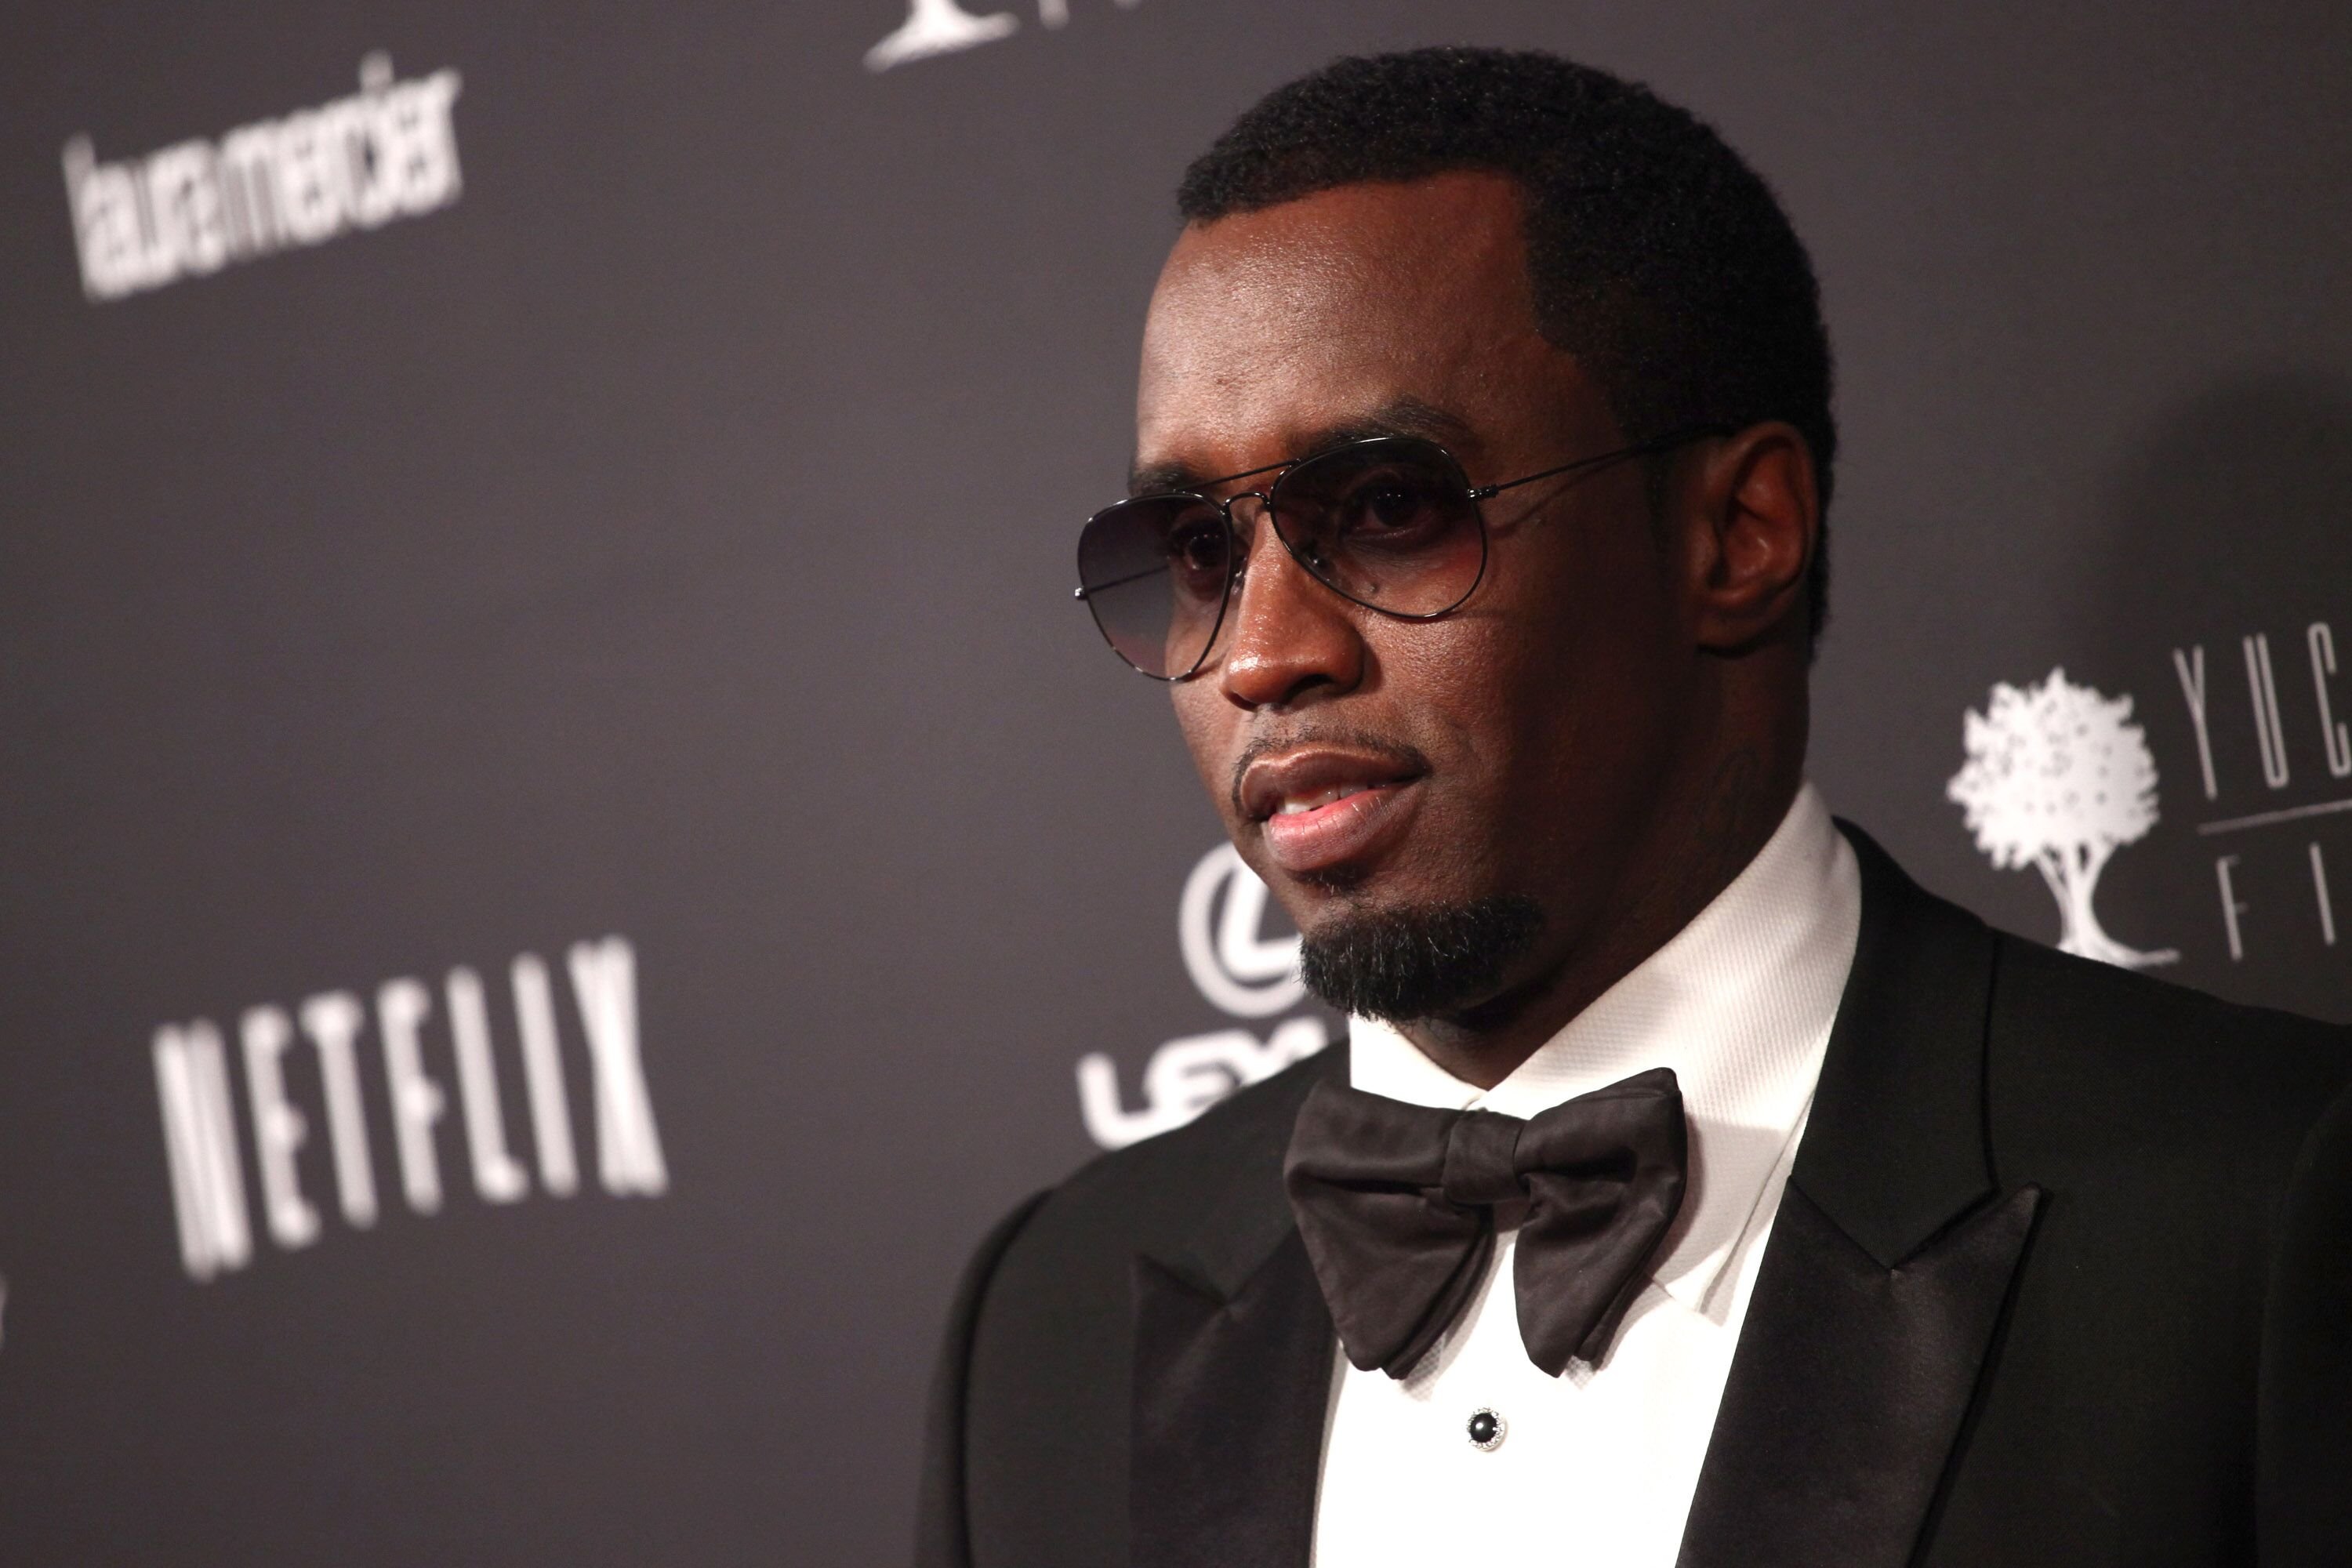 Sean "Diddy" Combs at Netflix premiere/ Source: Getty Images